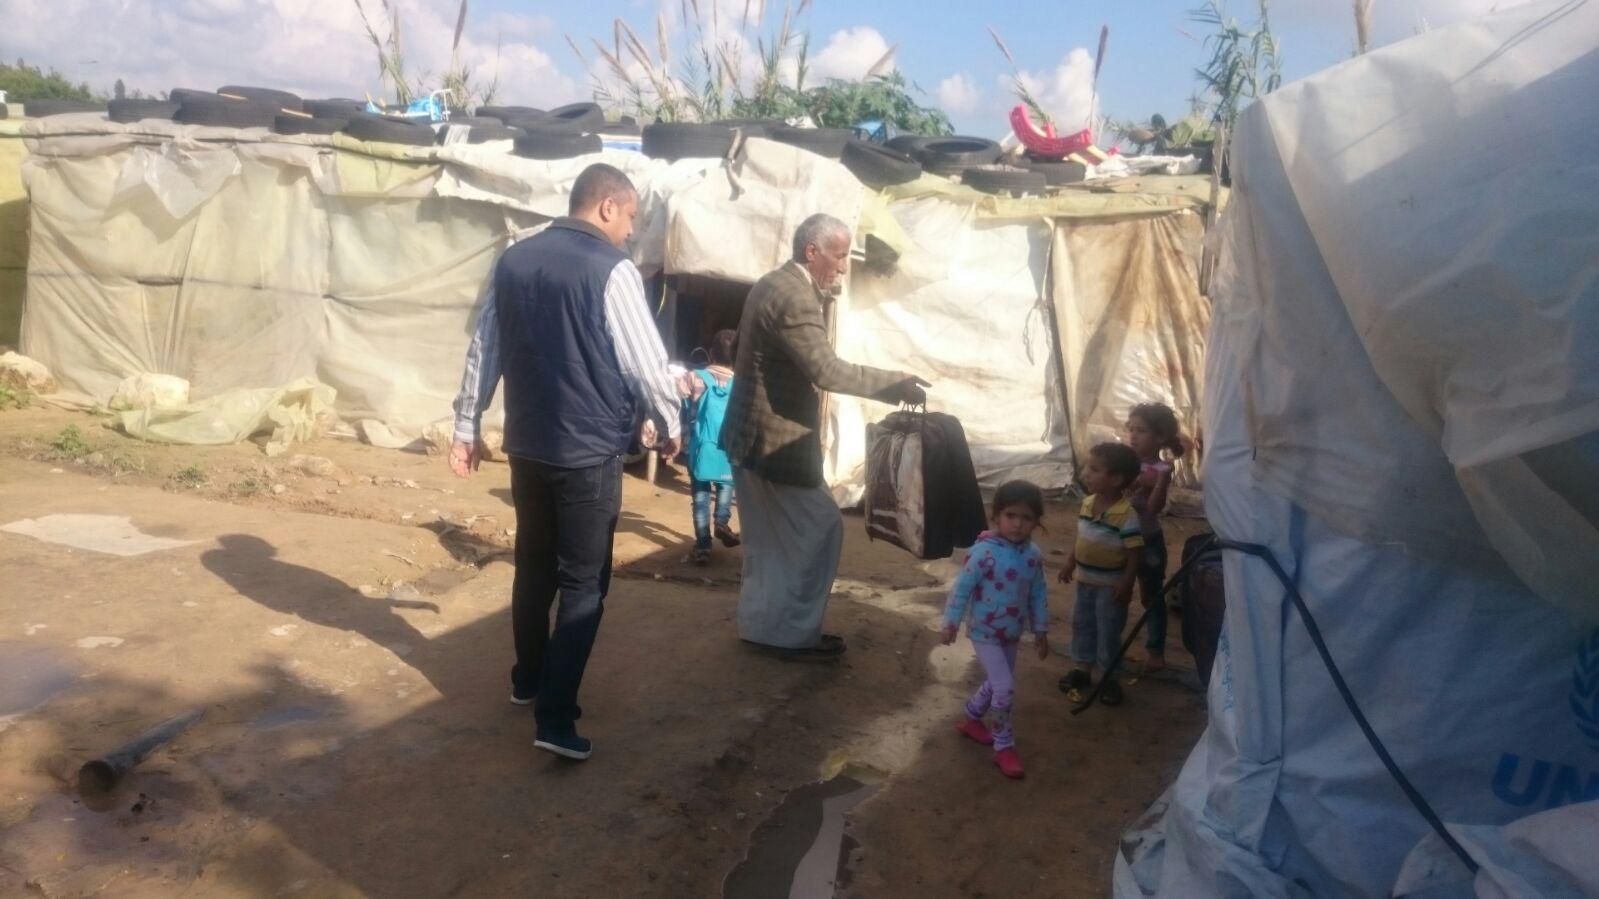 missionaries deliver blankets to children in a refugee camp in syria